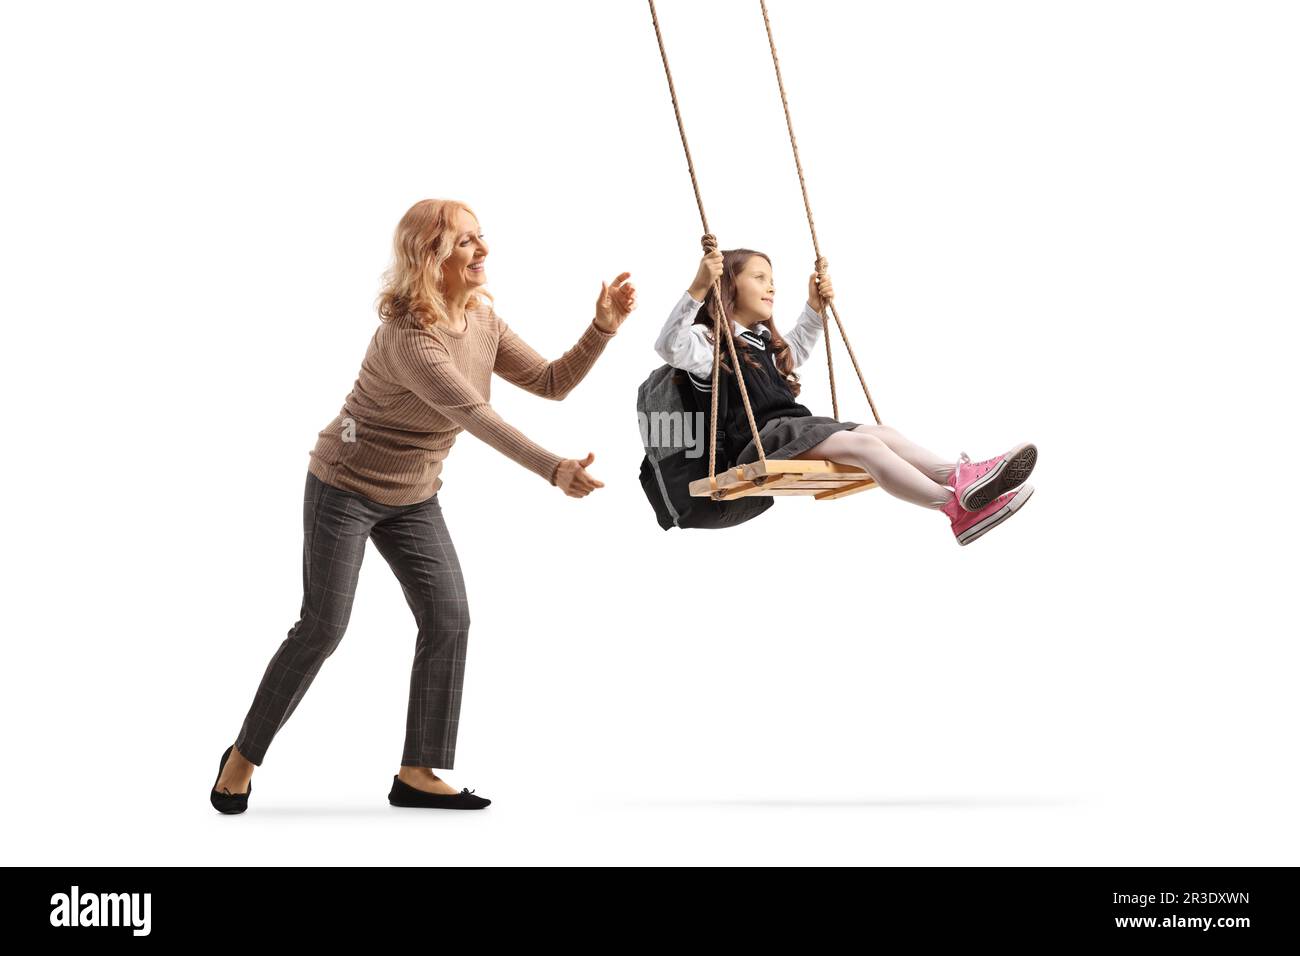 Woman pushing a schoolgirl on a swing isolated on white background Stock Photo